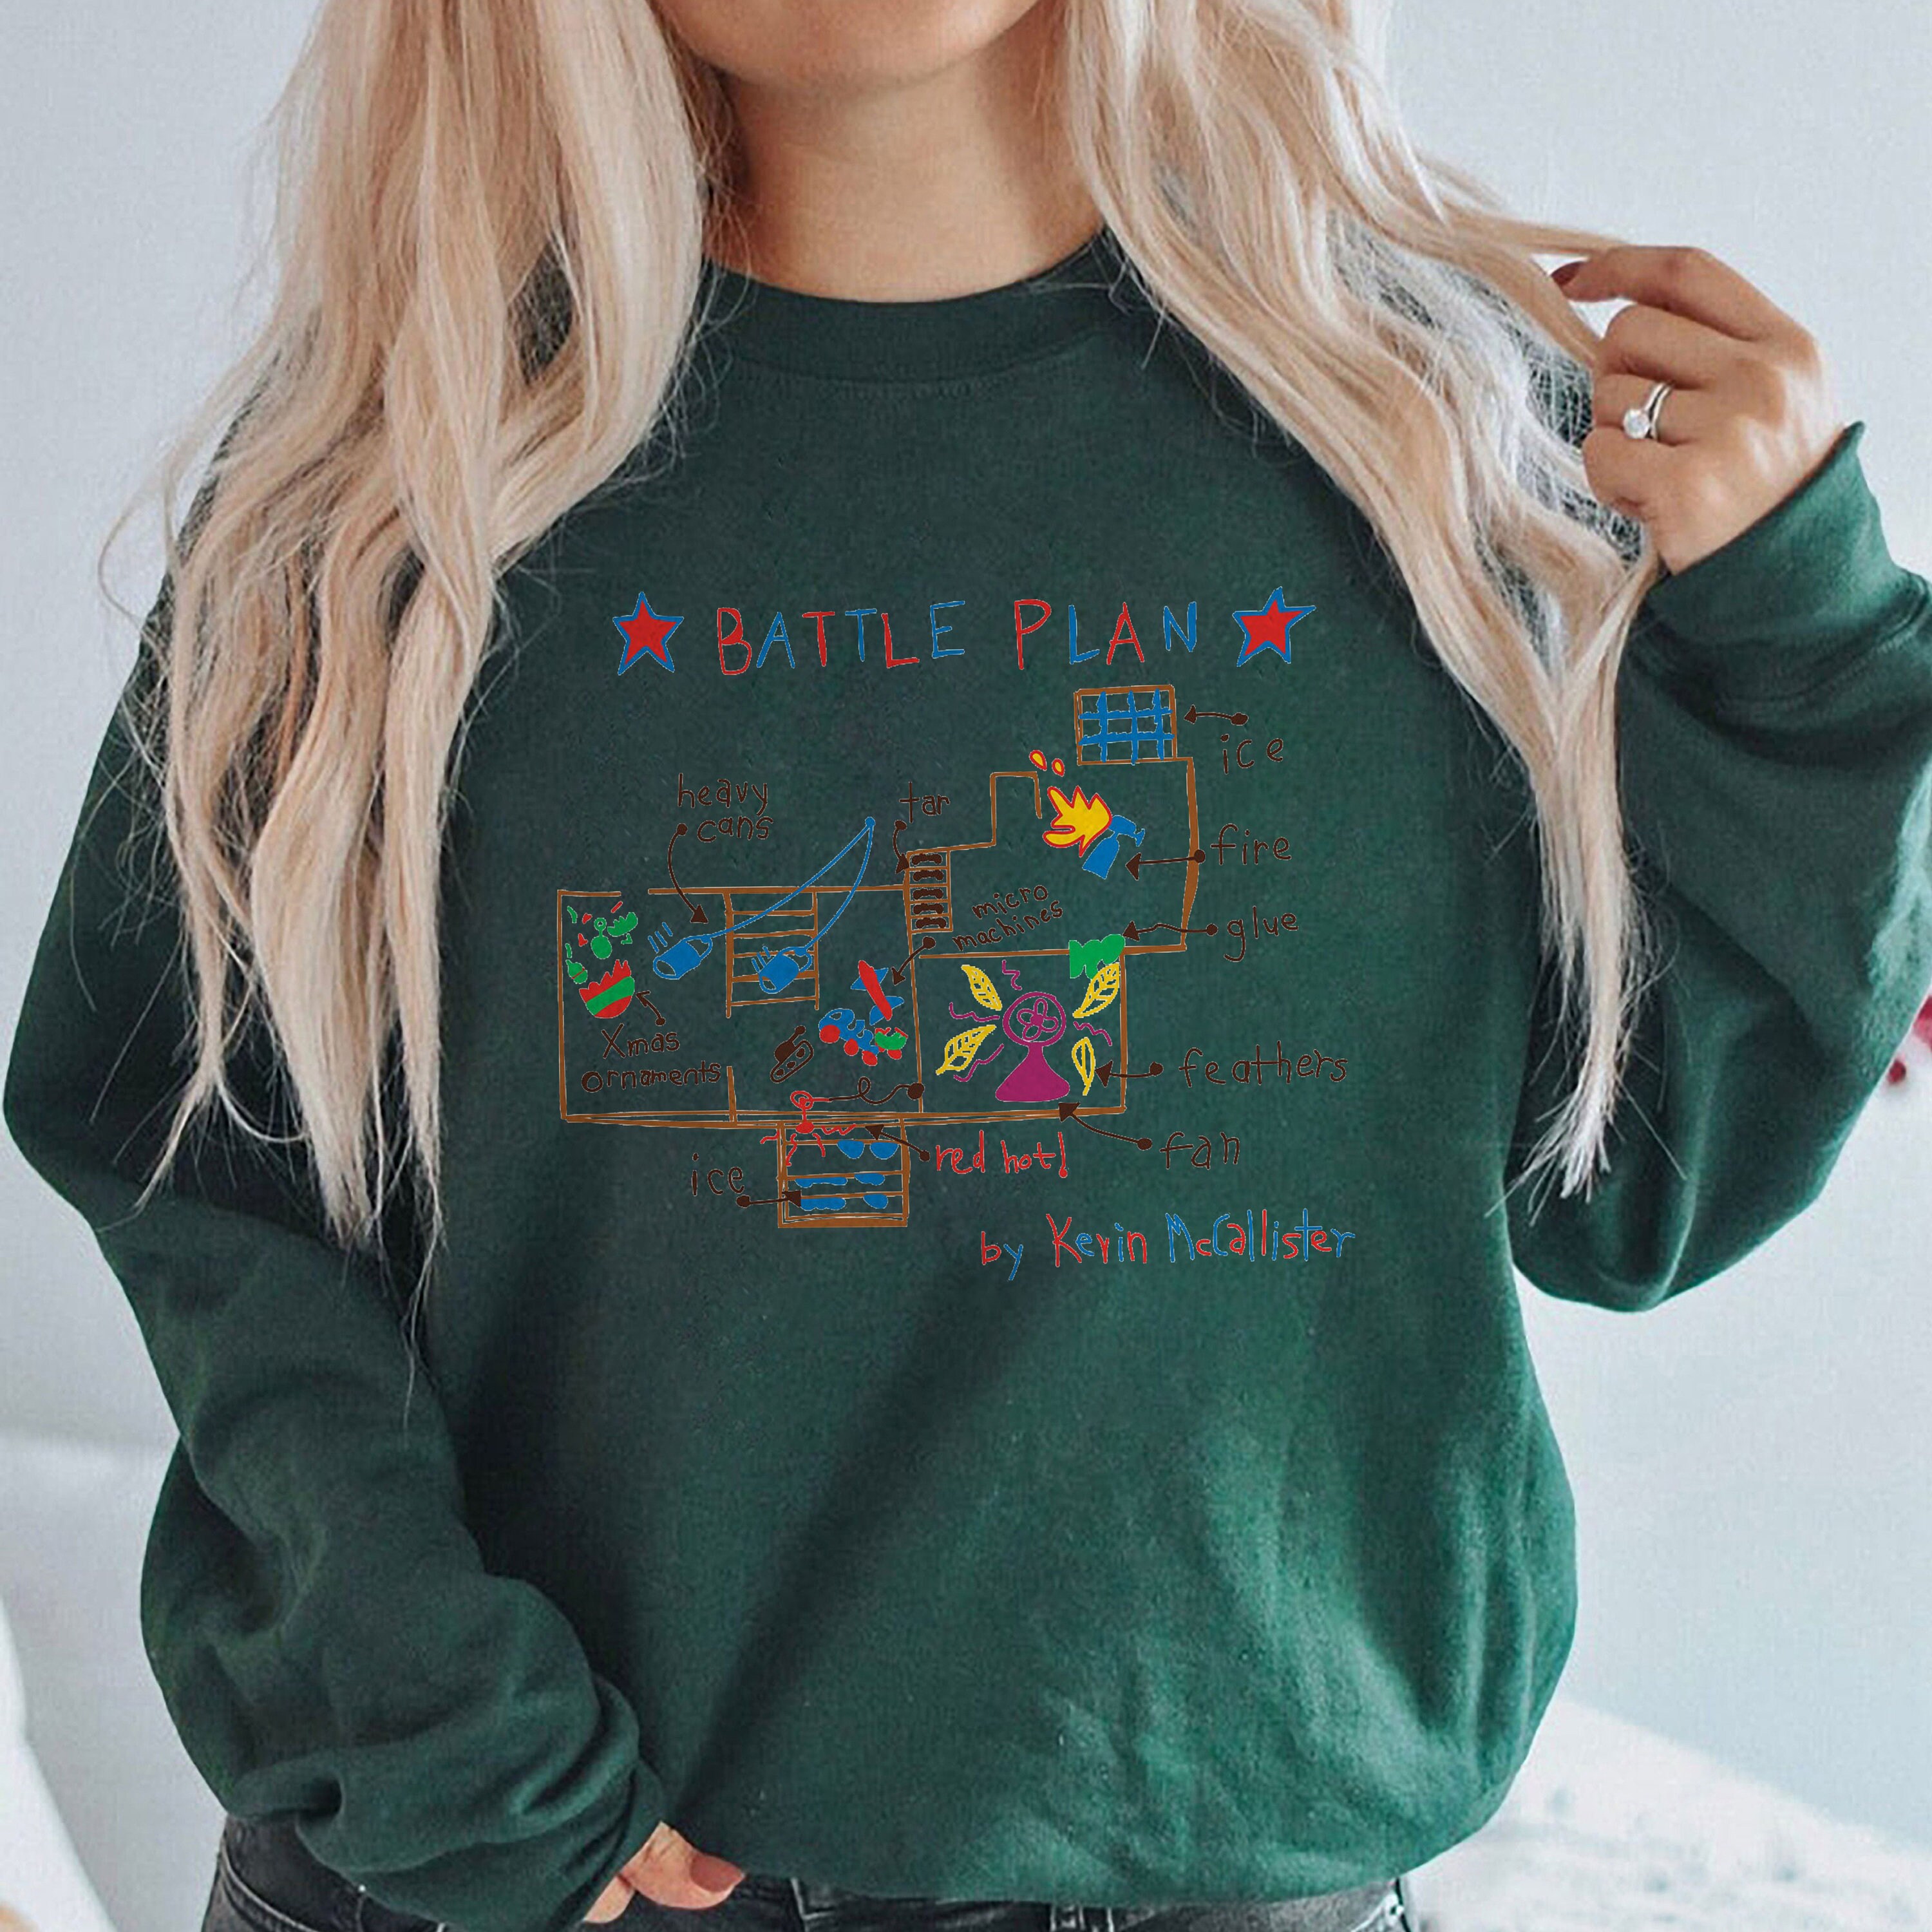 Discover Battle Plan By Kevin McCallister Sweatshirt, McCallister Home Security Shirt, Home Alone, Christmas Movies, Christmas Gift, Kids Xmas Sweatshirts